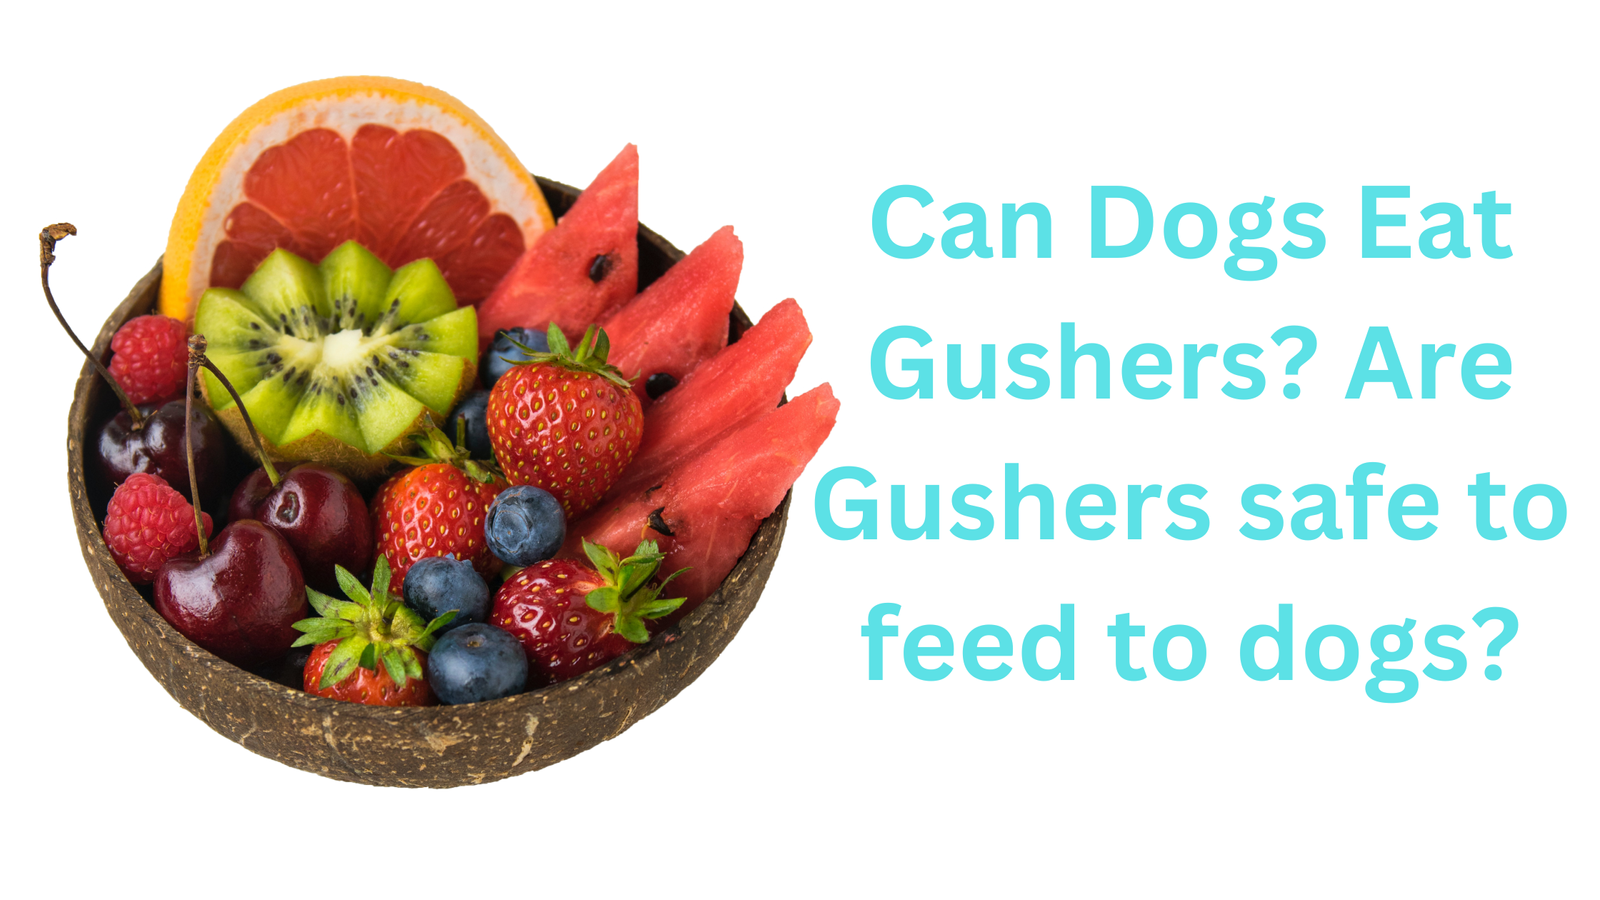 Can Dogs Eat Gushers? Are Gushers safe to feed to dogs?